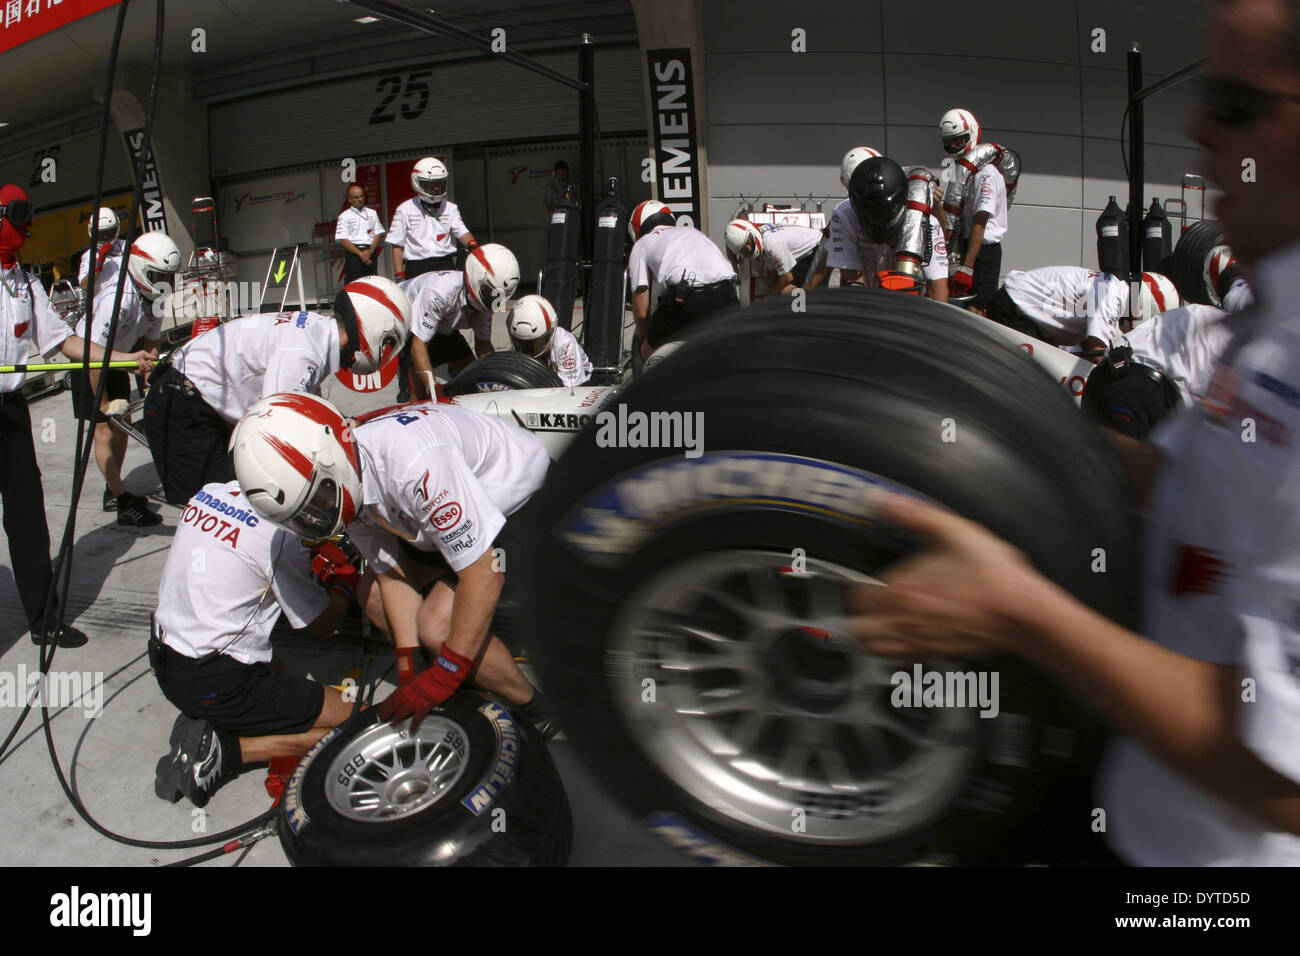 Pansonic Toyota team practices tire changing at the Chinese first Grand Prix on Sunday Sept Stock Photo